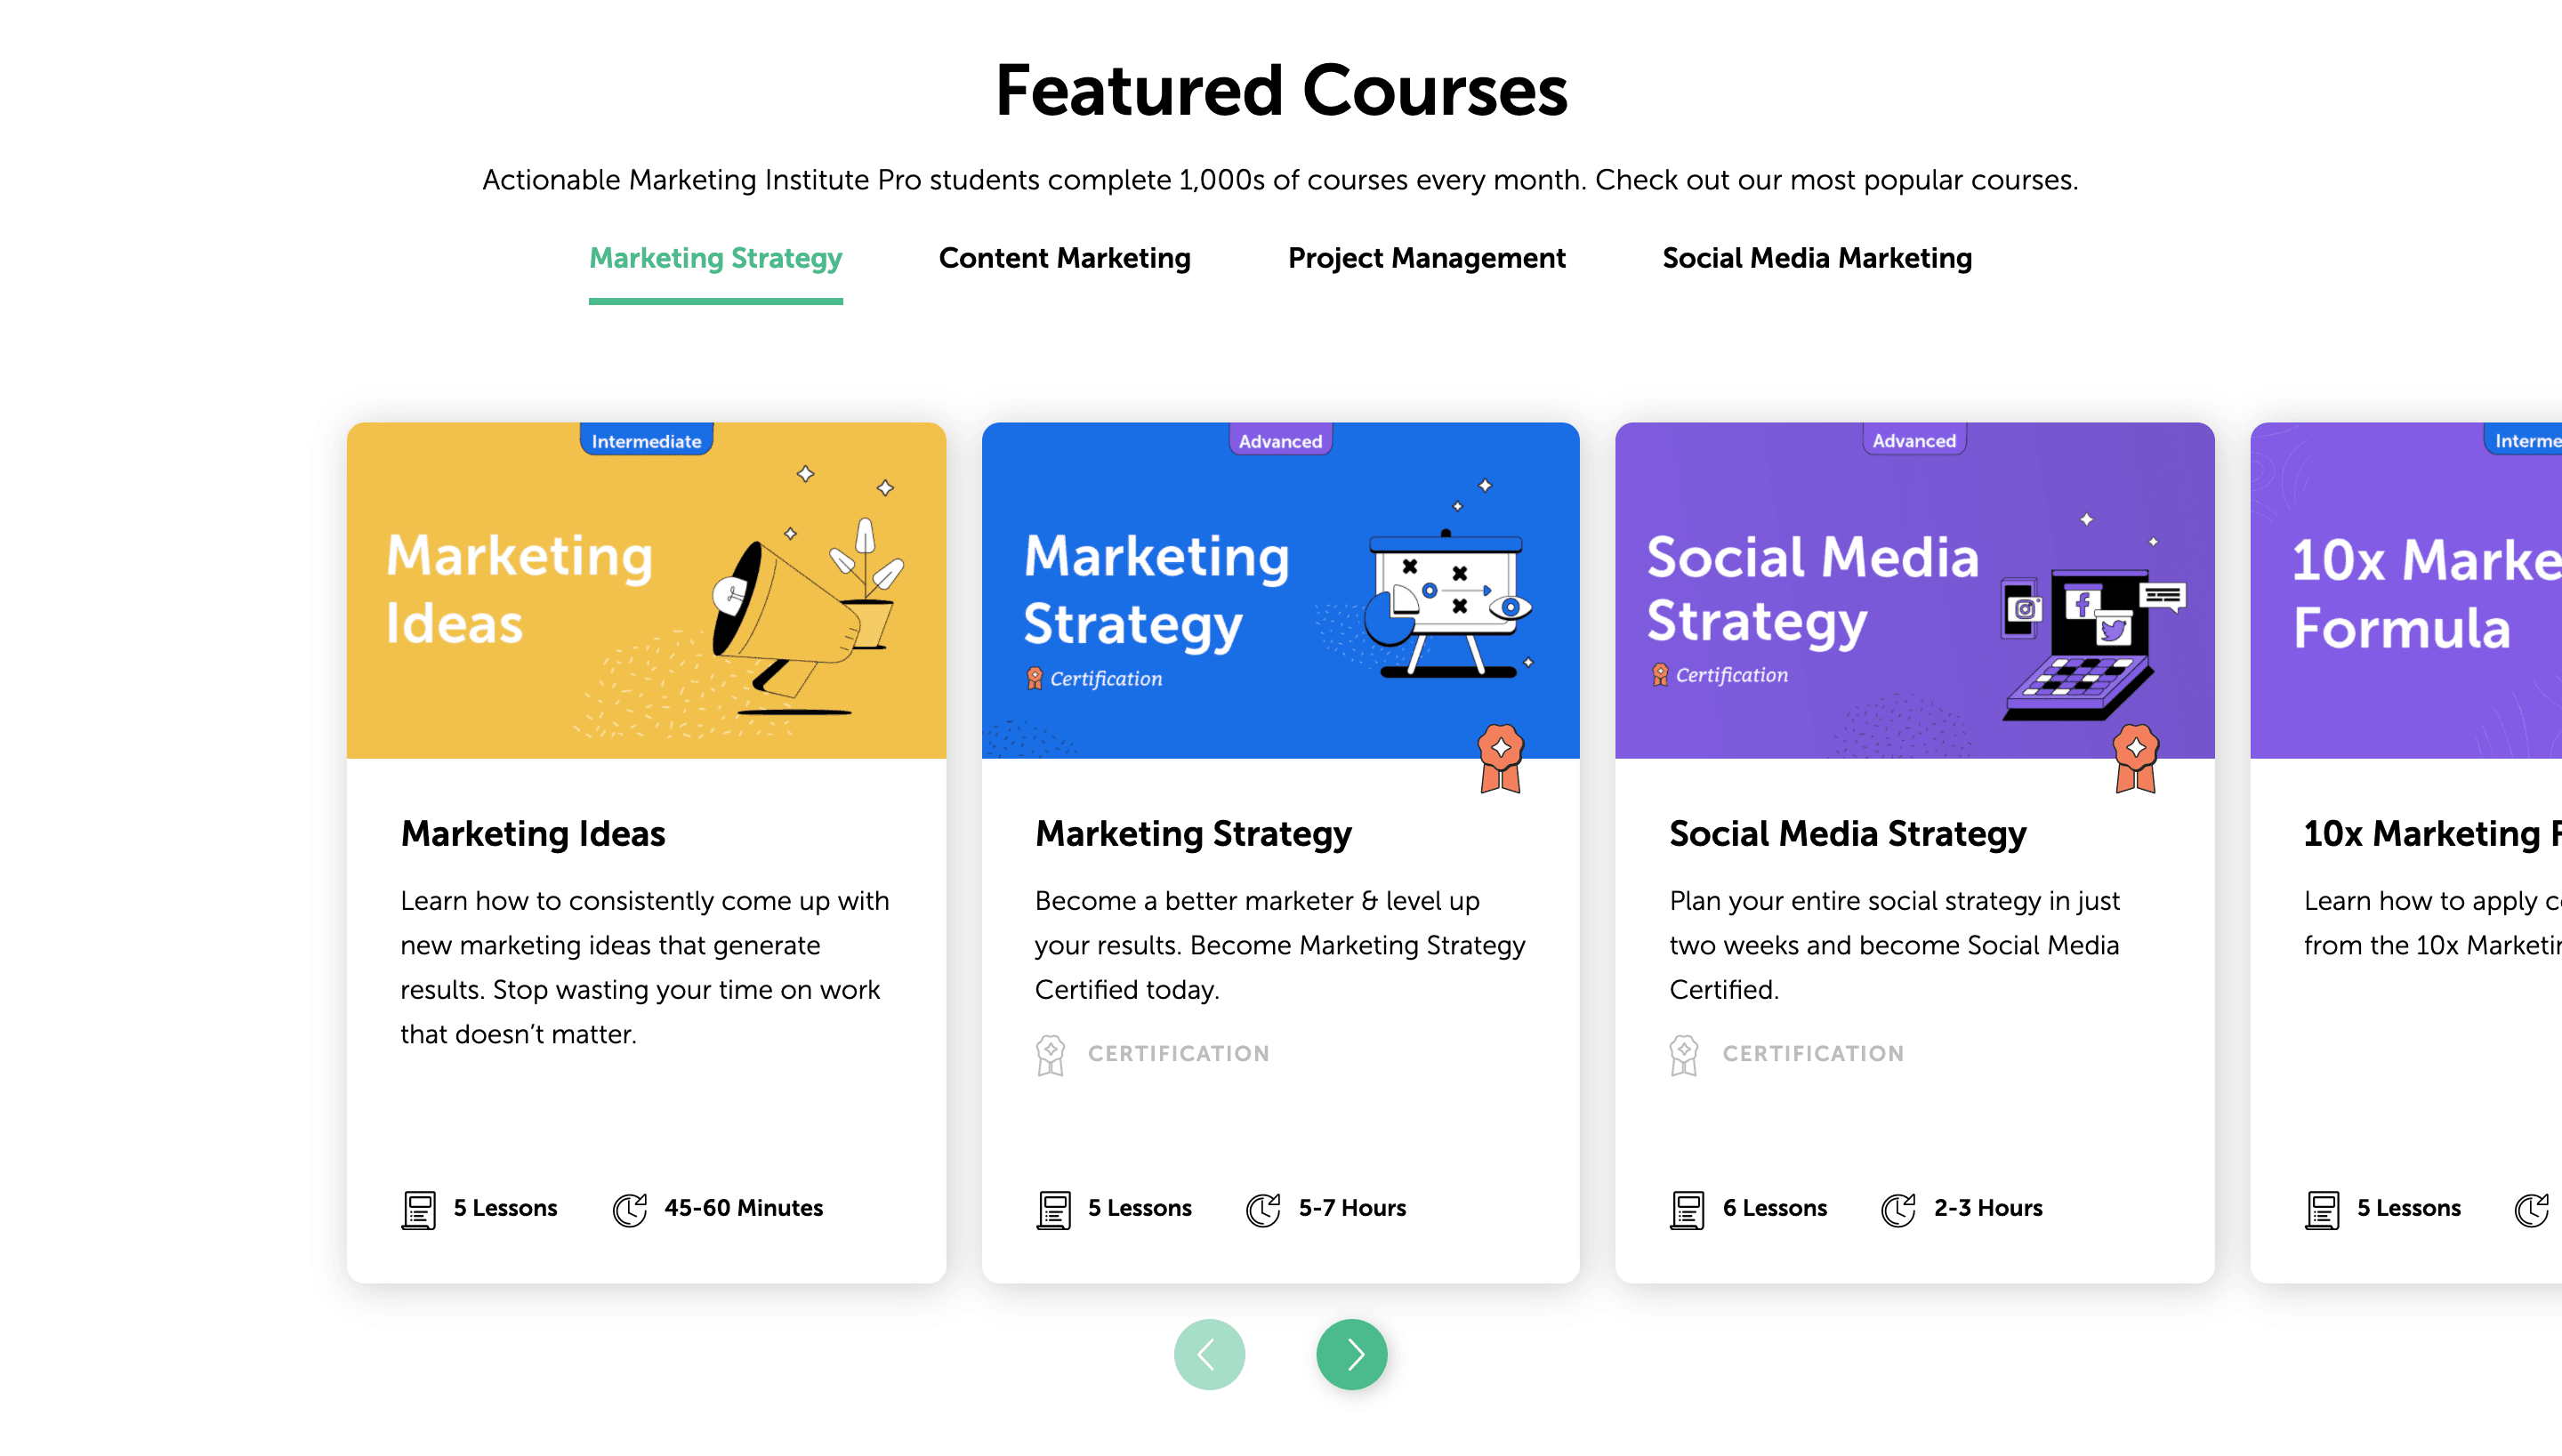 Featured courses in CoSchedule AMI